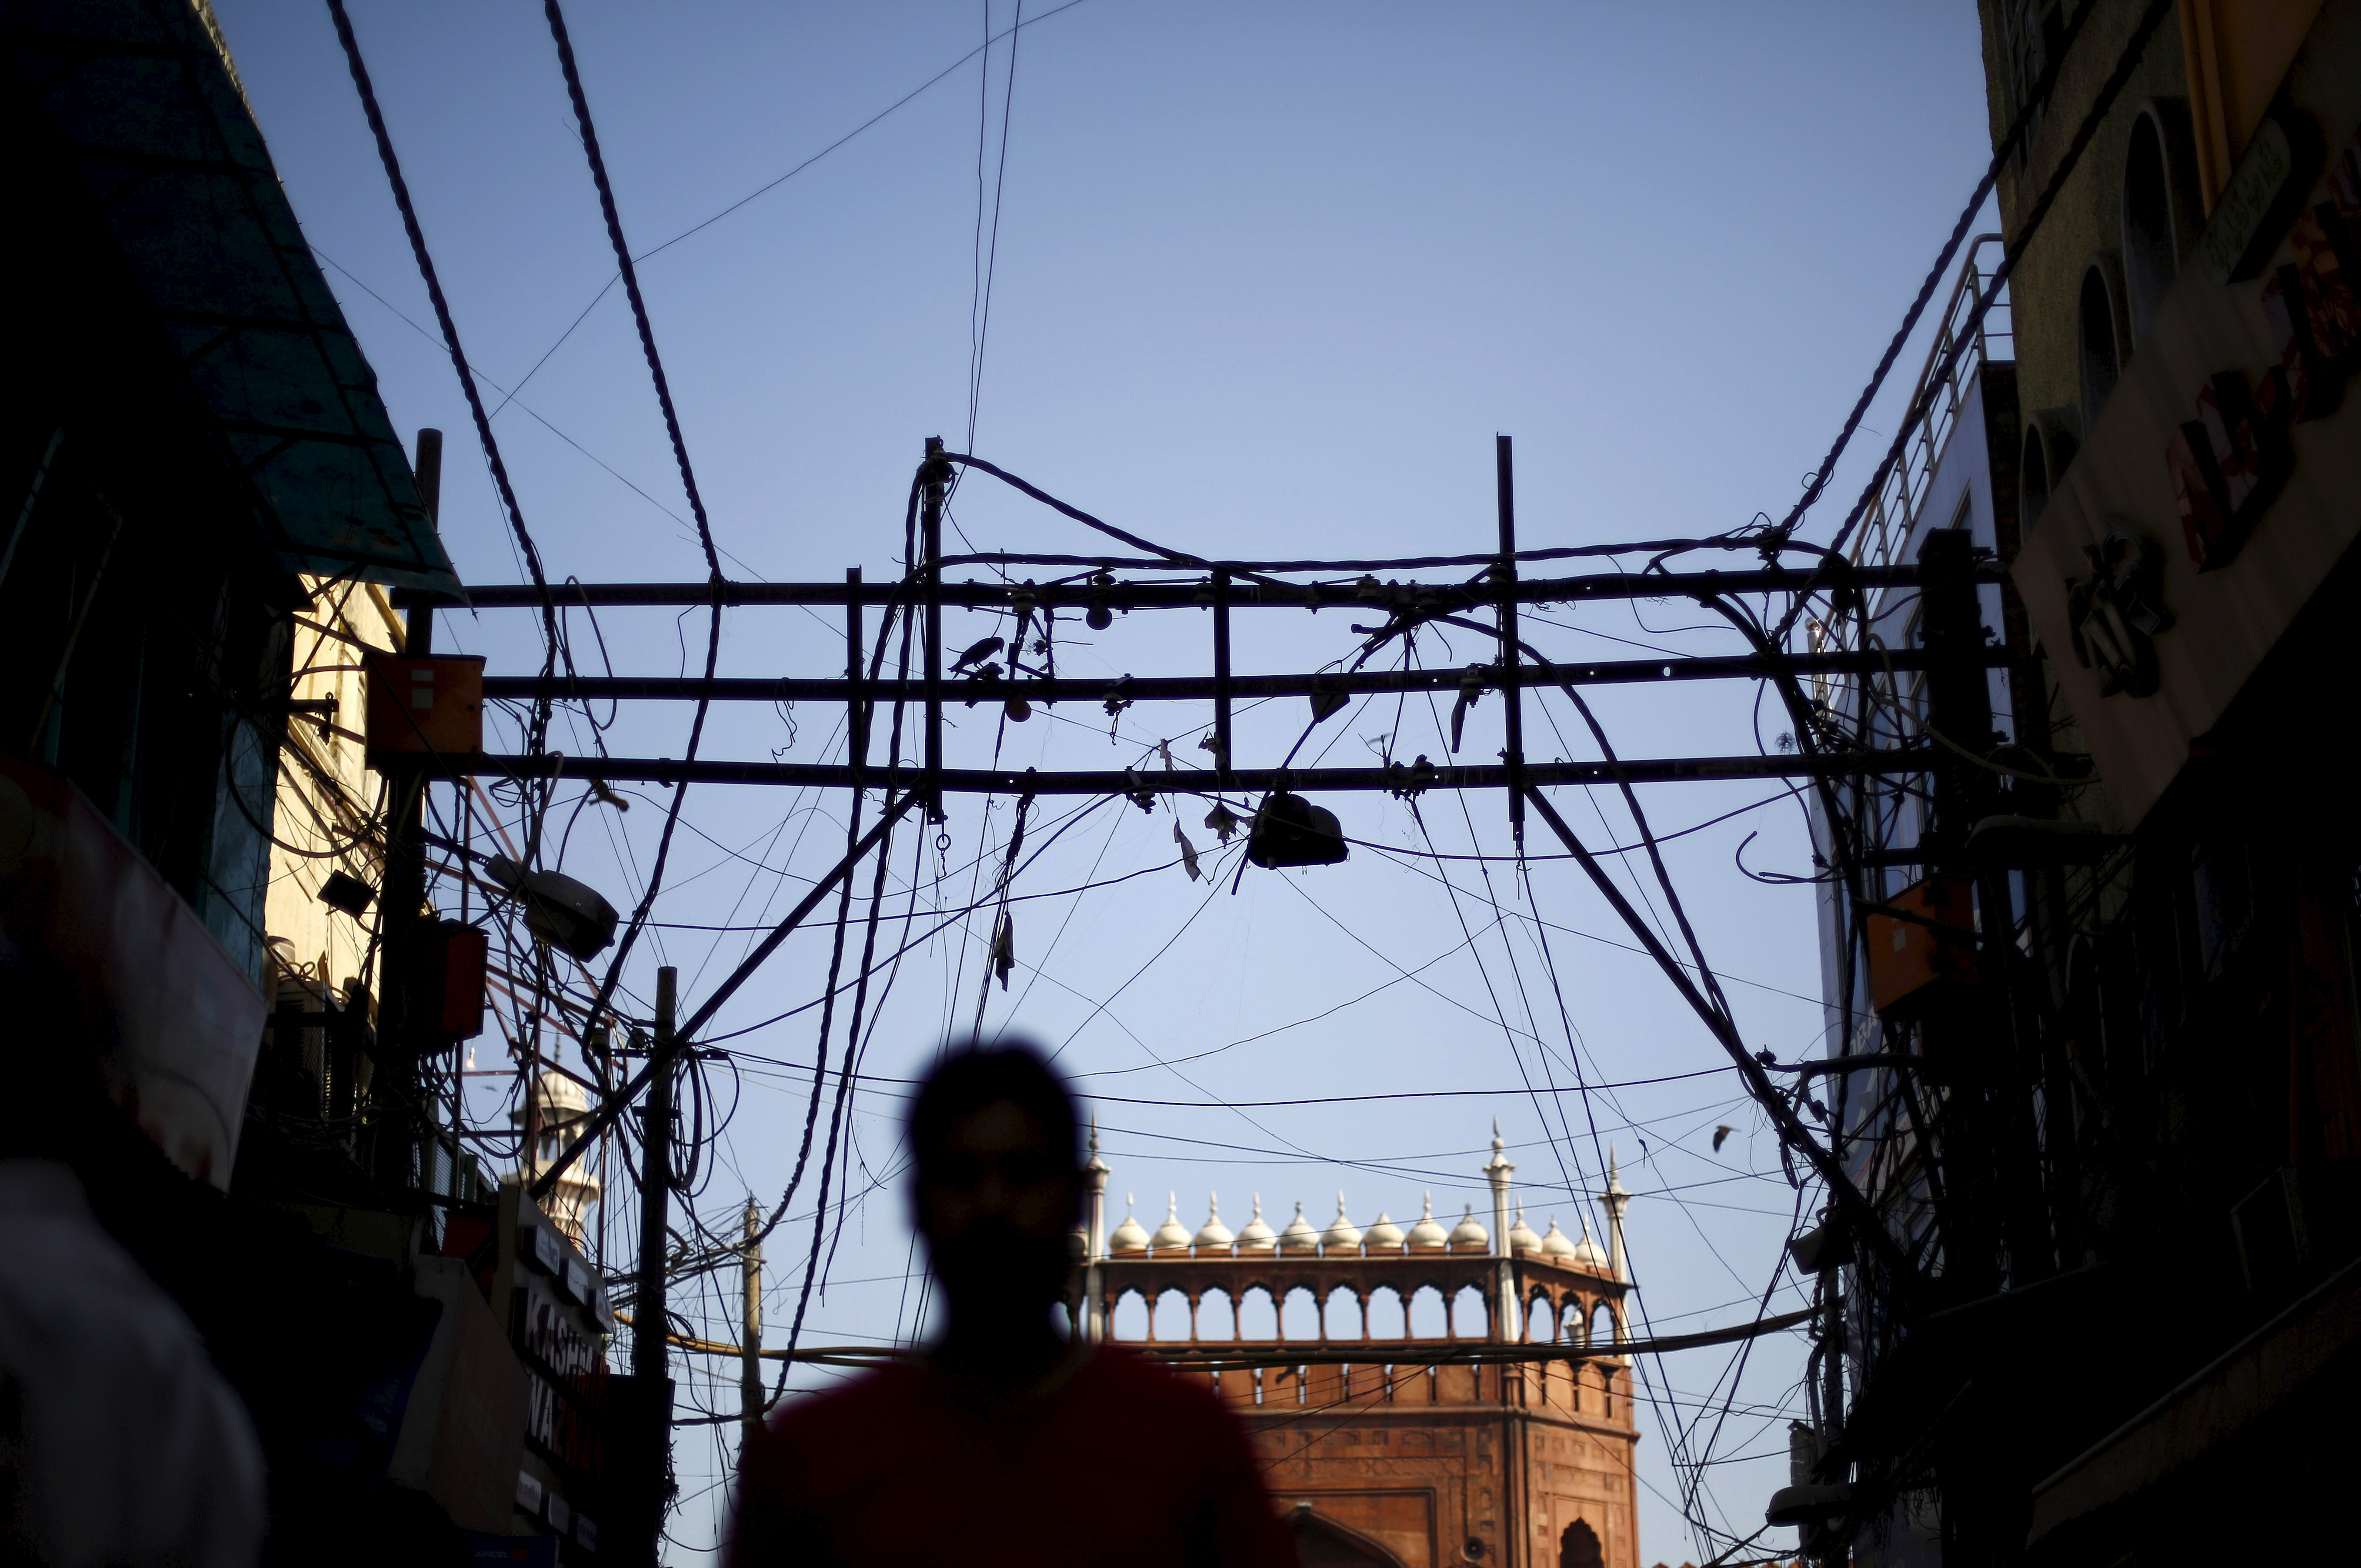 A man is silhouetted against the backdrop of Jama Masjid (Grand Mosque) as overhead power cables are seen in the old quarters of Delhi, India, September 10, 2015. REUTERS/Adnan Abidi